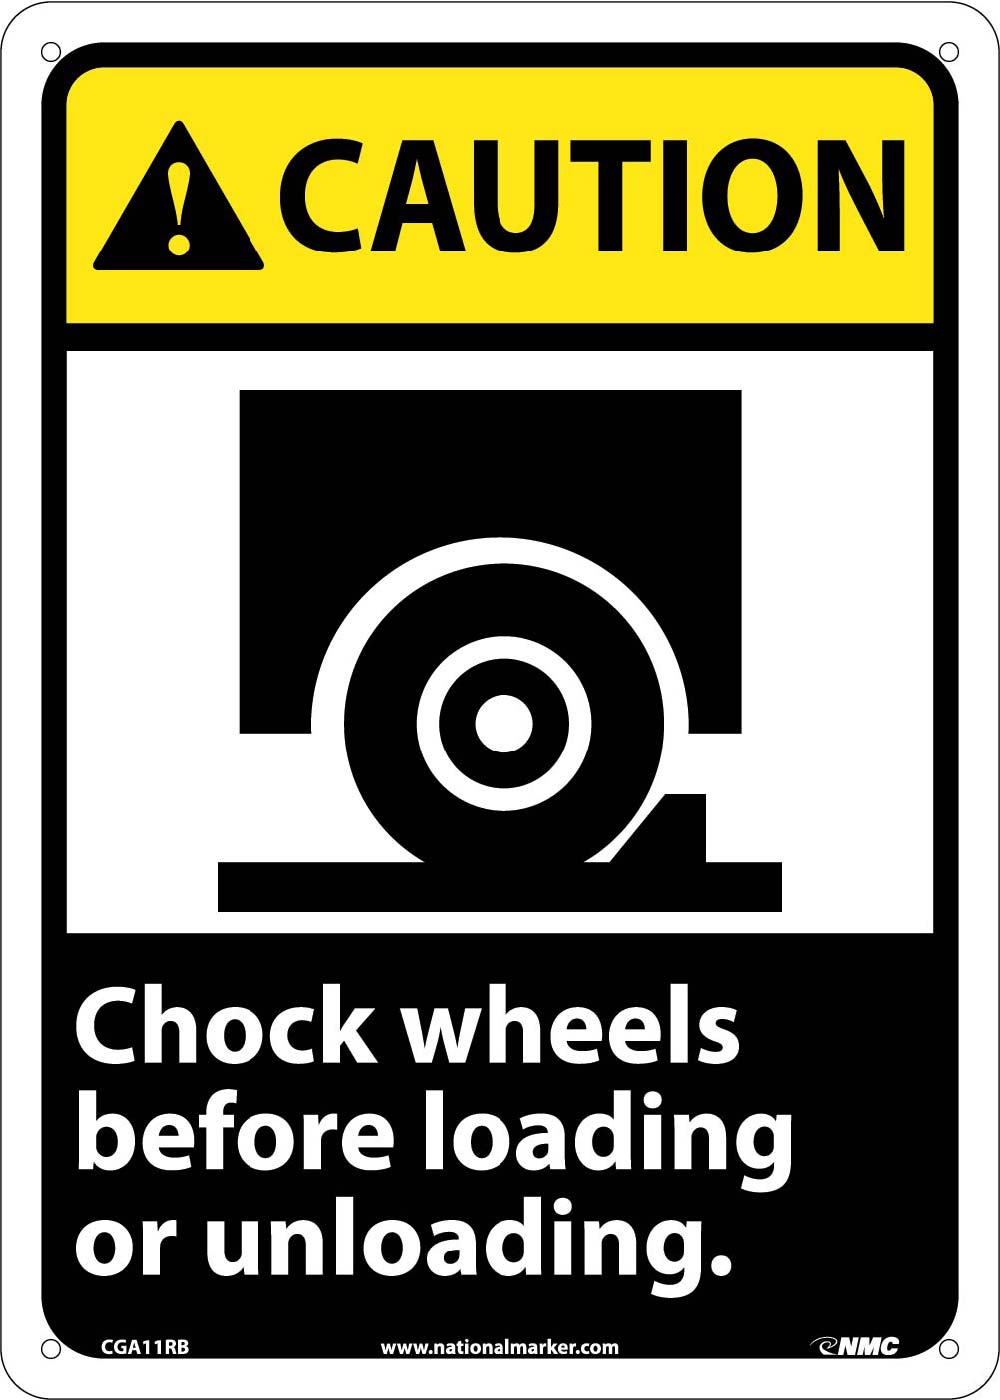 Caution Chock Wheels Before Loading Or Unloading Sign